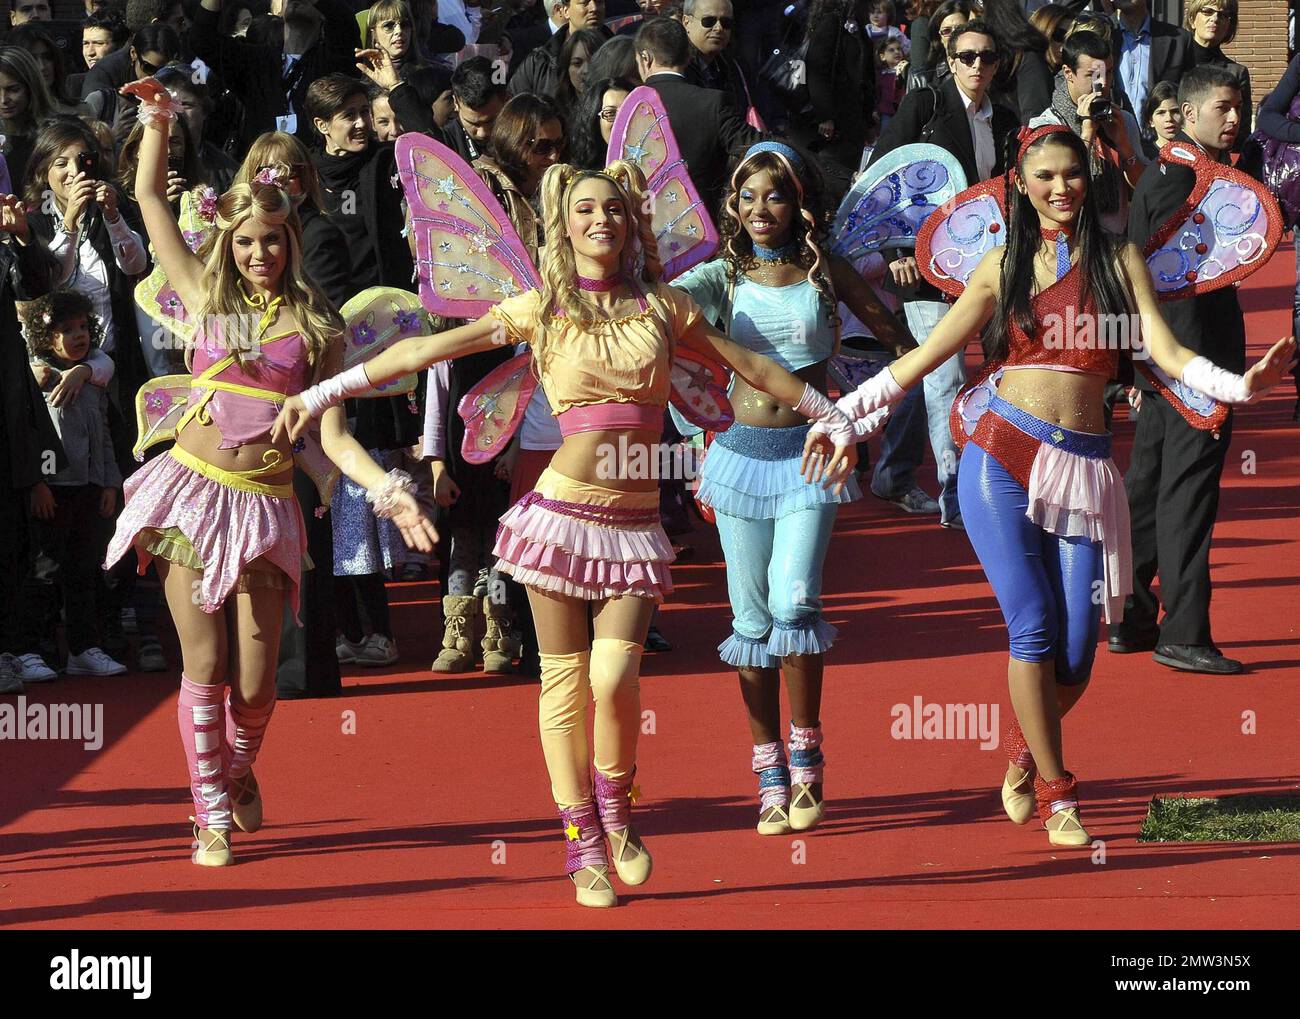 Cast walk the red carpet at the Winx Club 3D premiere at the